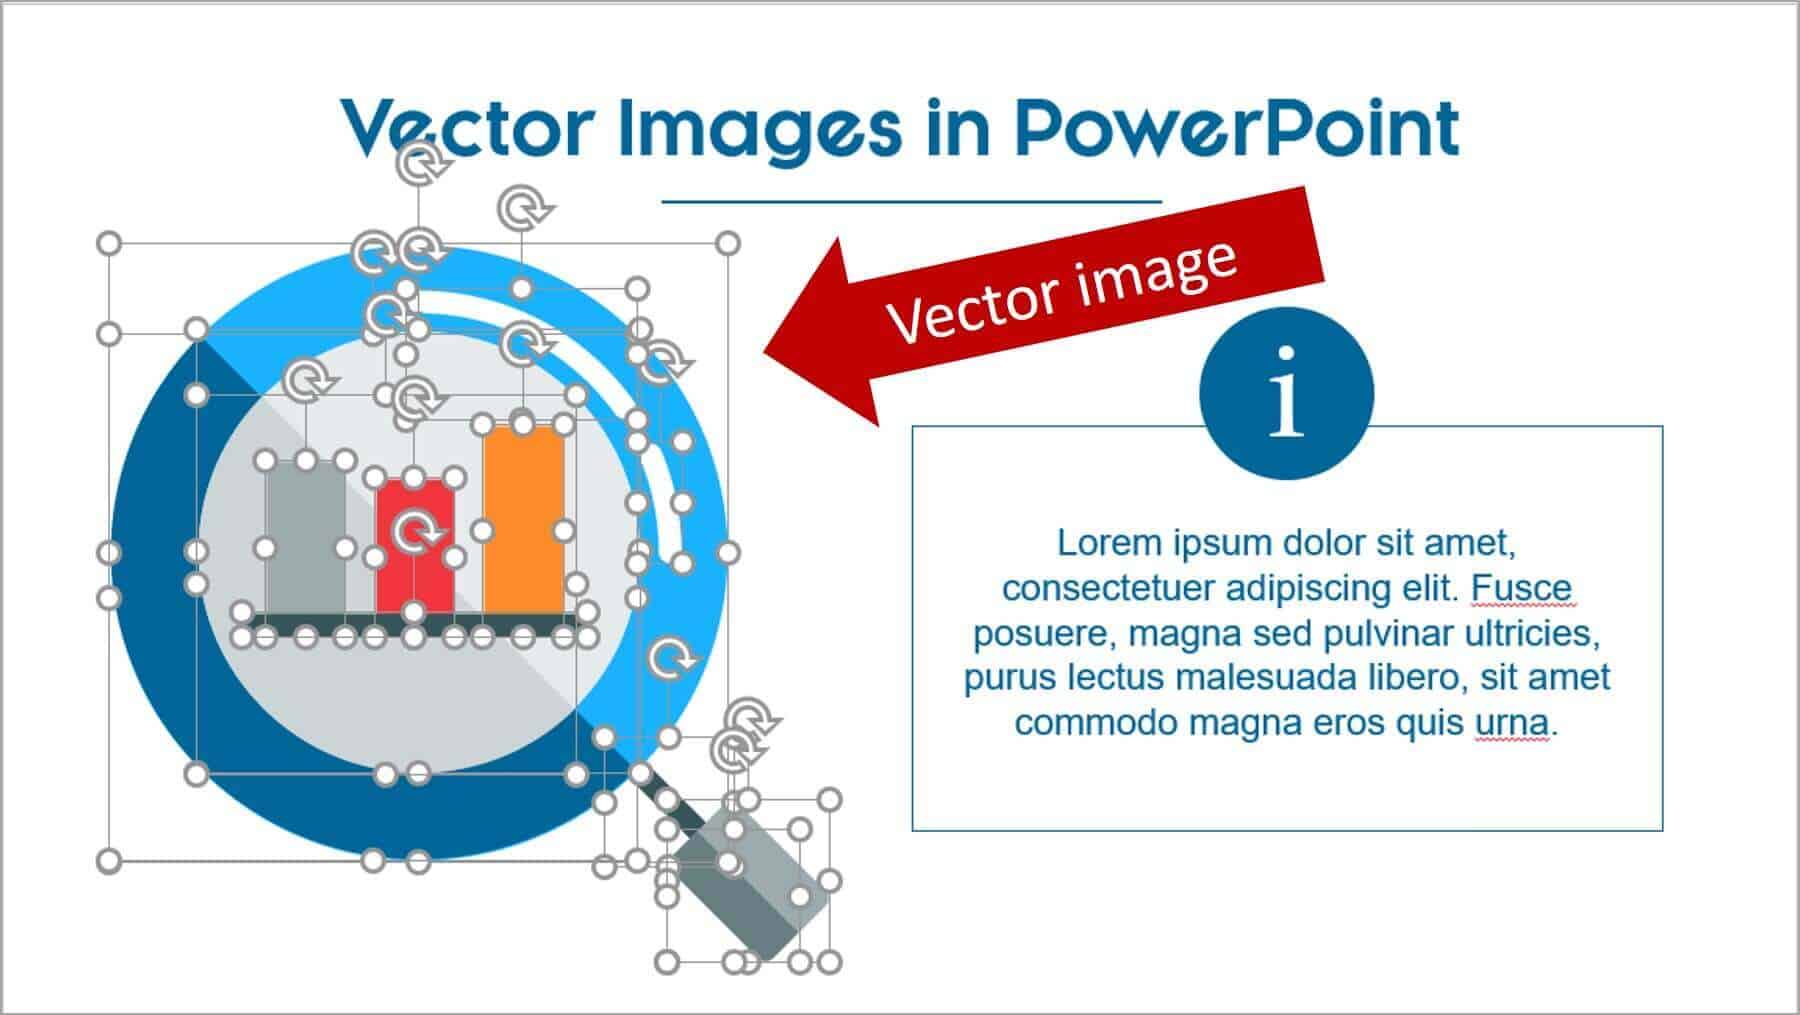 PowerPoint Graphics: How to Improve Your Presentations w/ Graphics